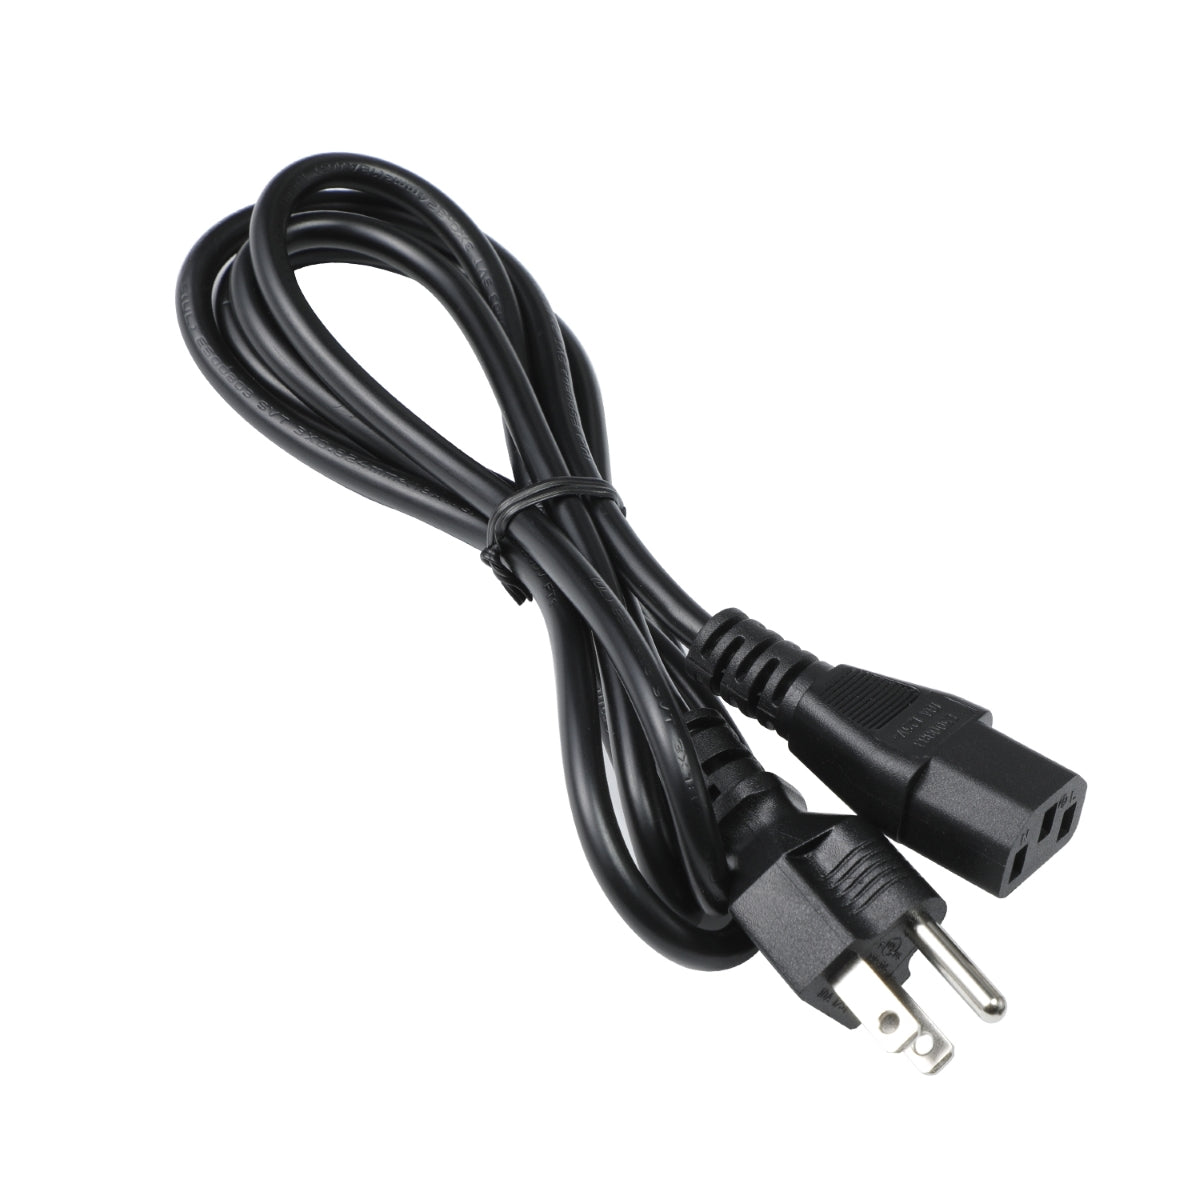 Power Cord for HP ProDesk 405 G2 Microtower SFF Desktop PC.